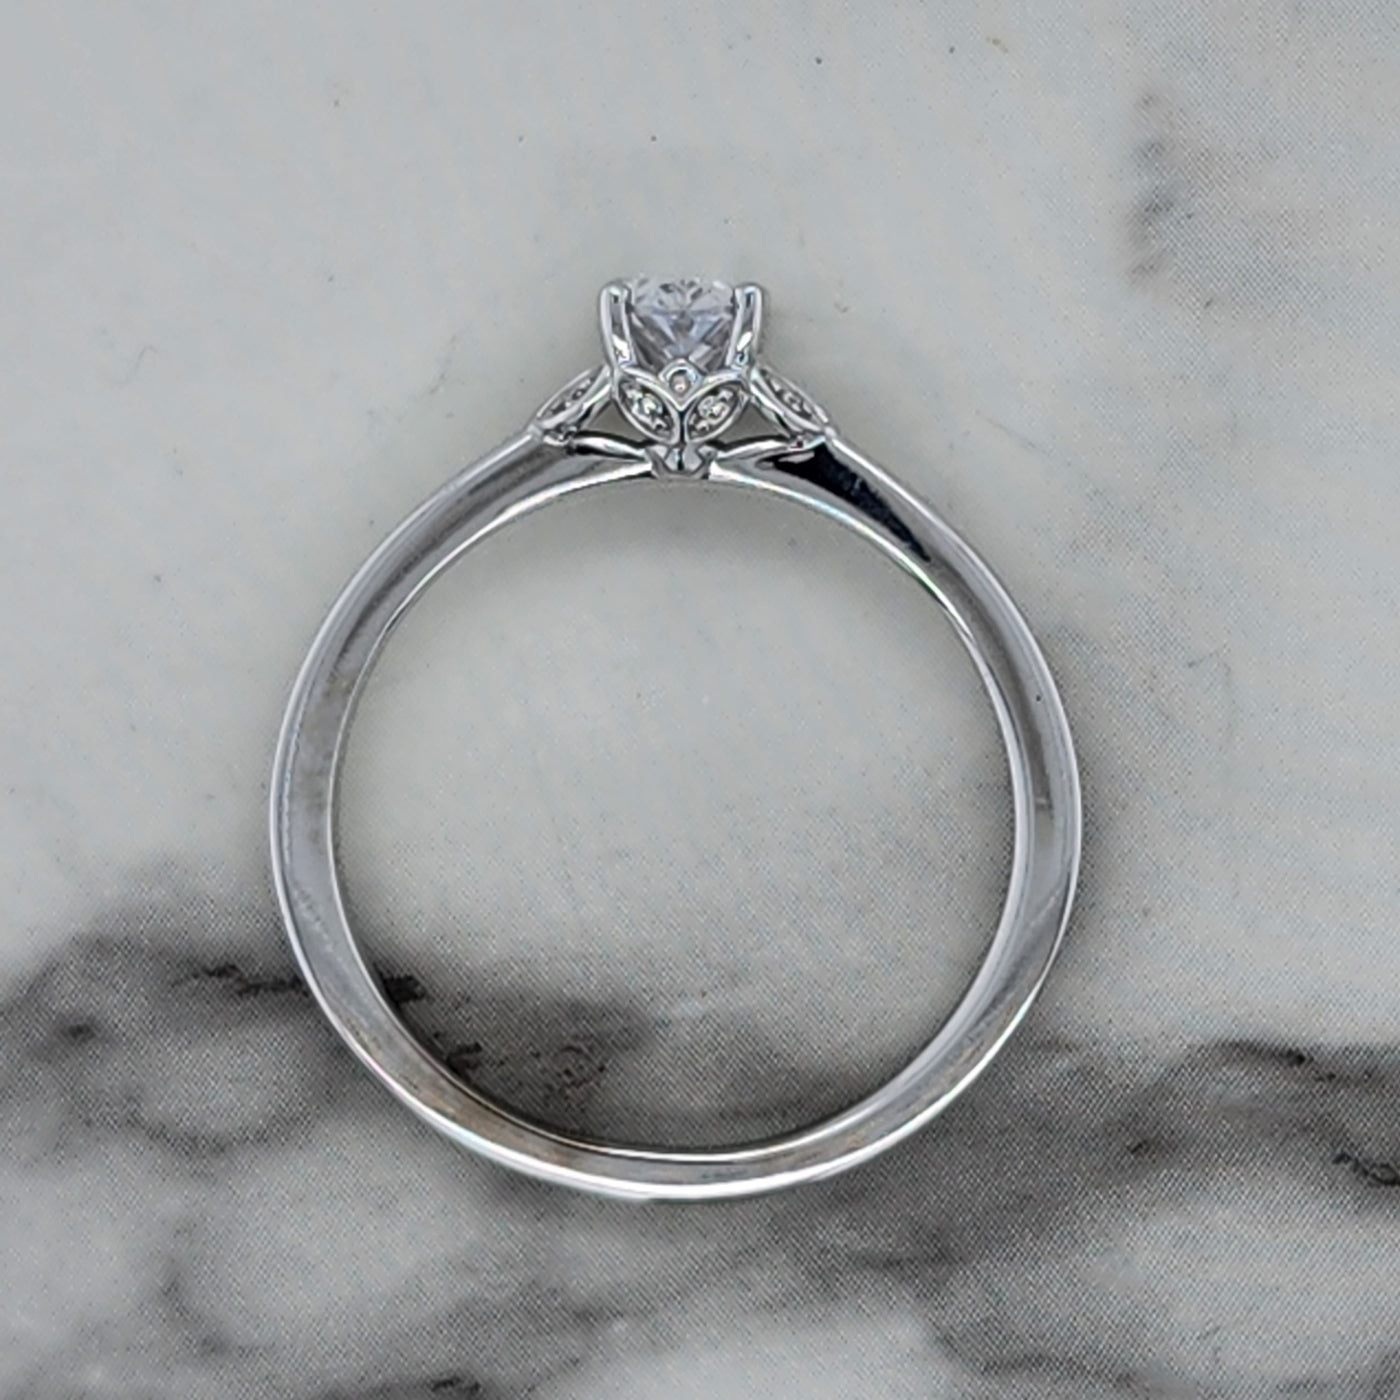 Dainty White Gold Engagement Ring With Oval Center